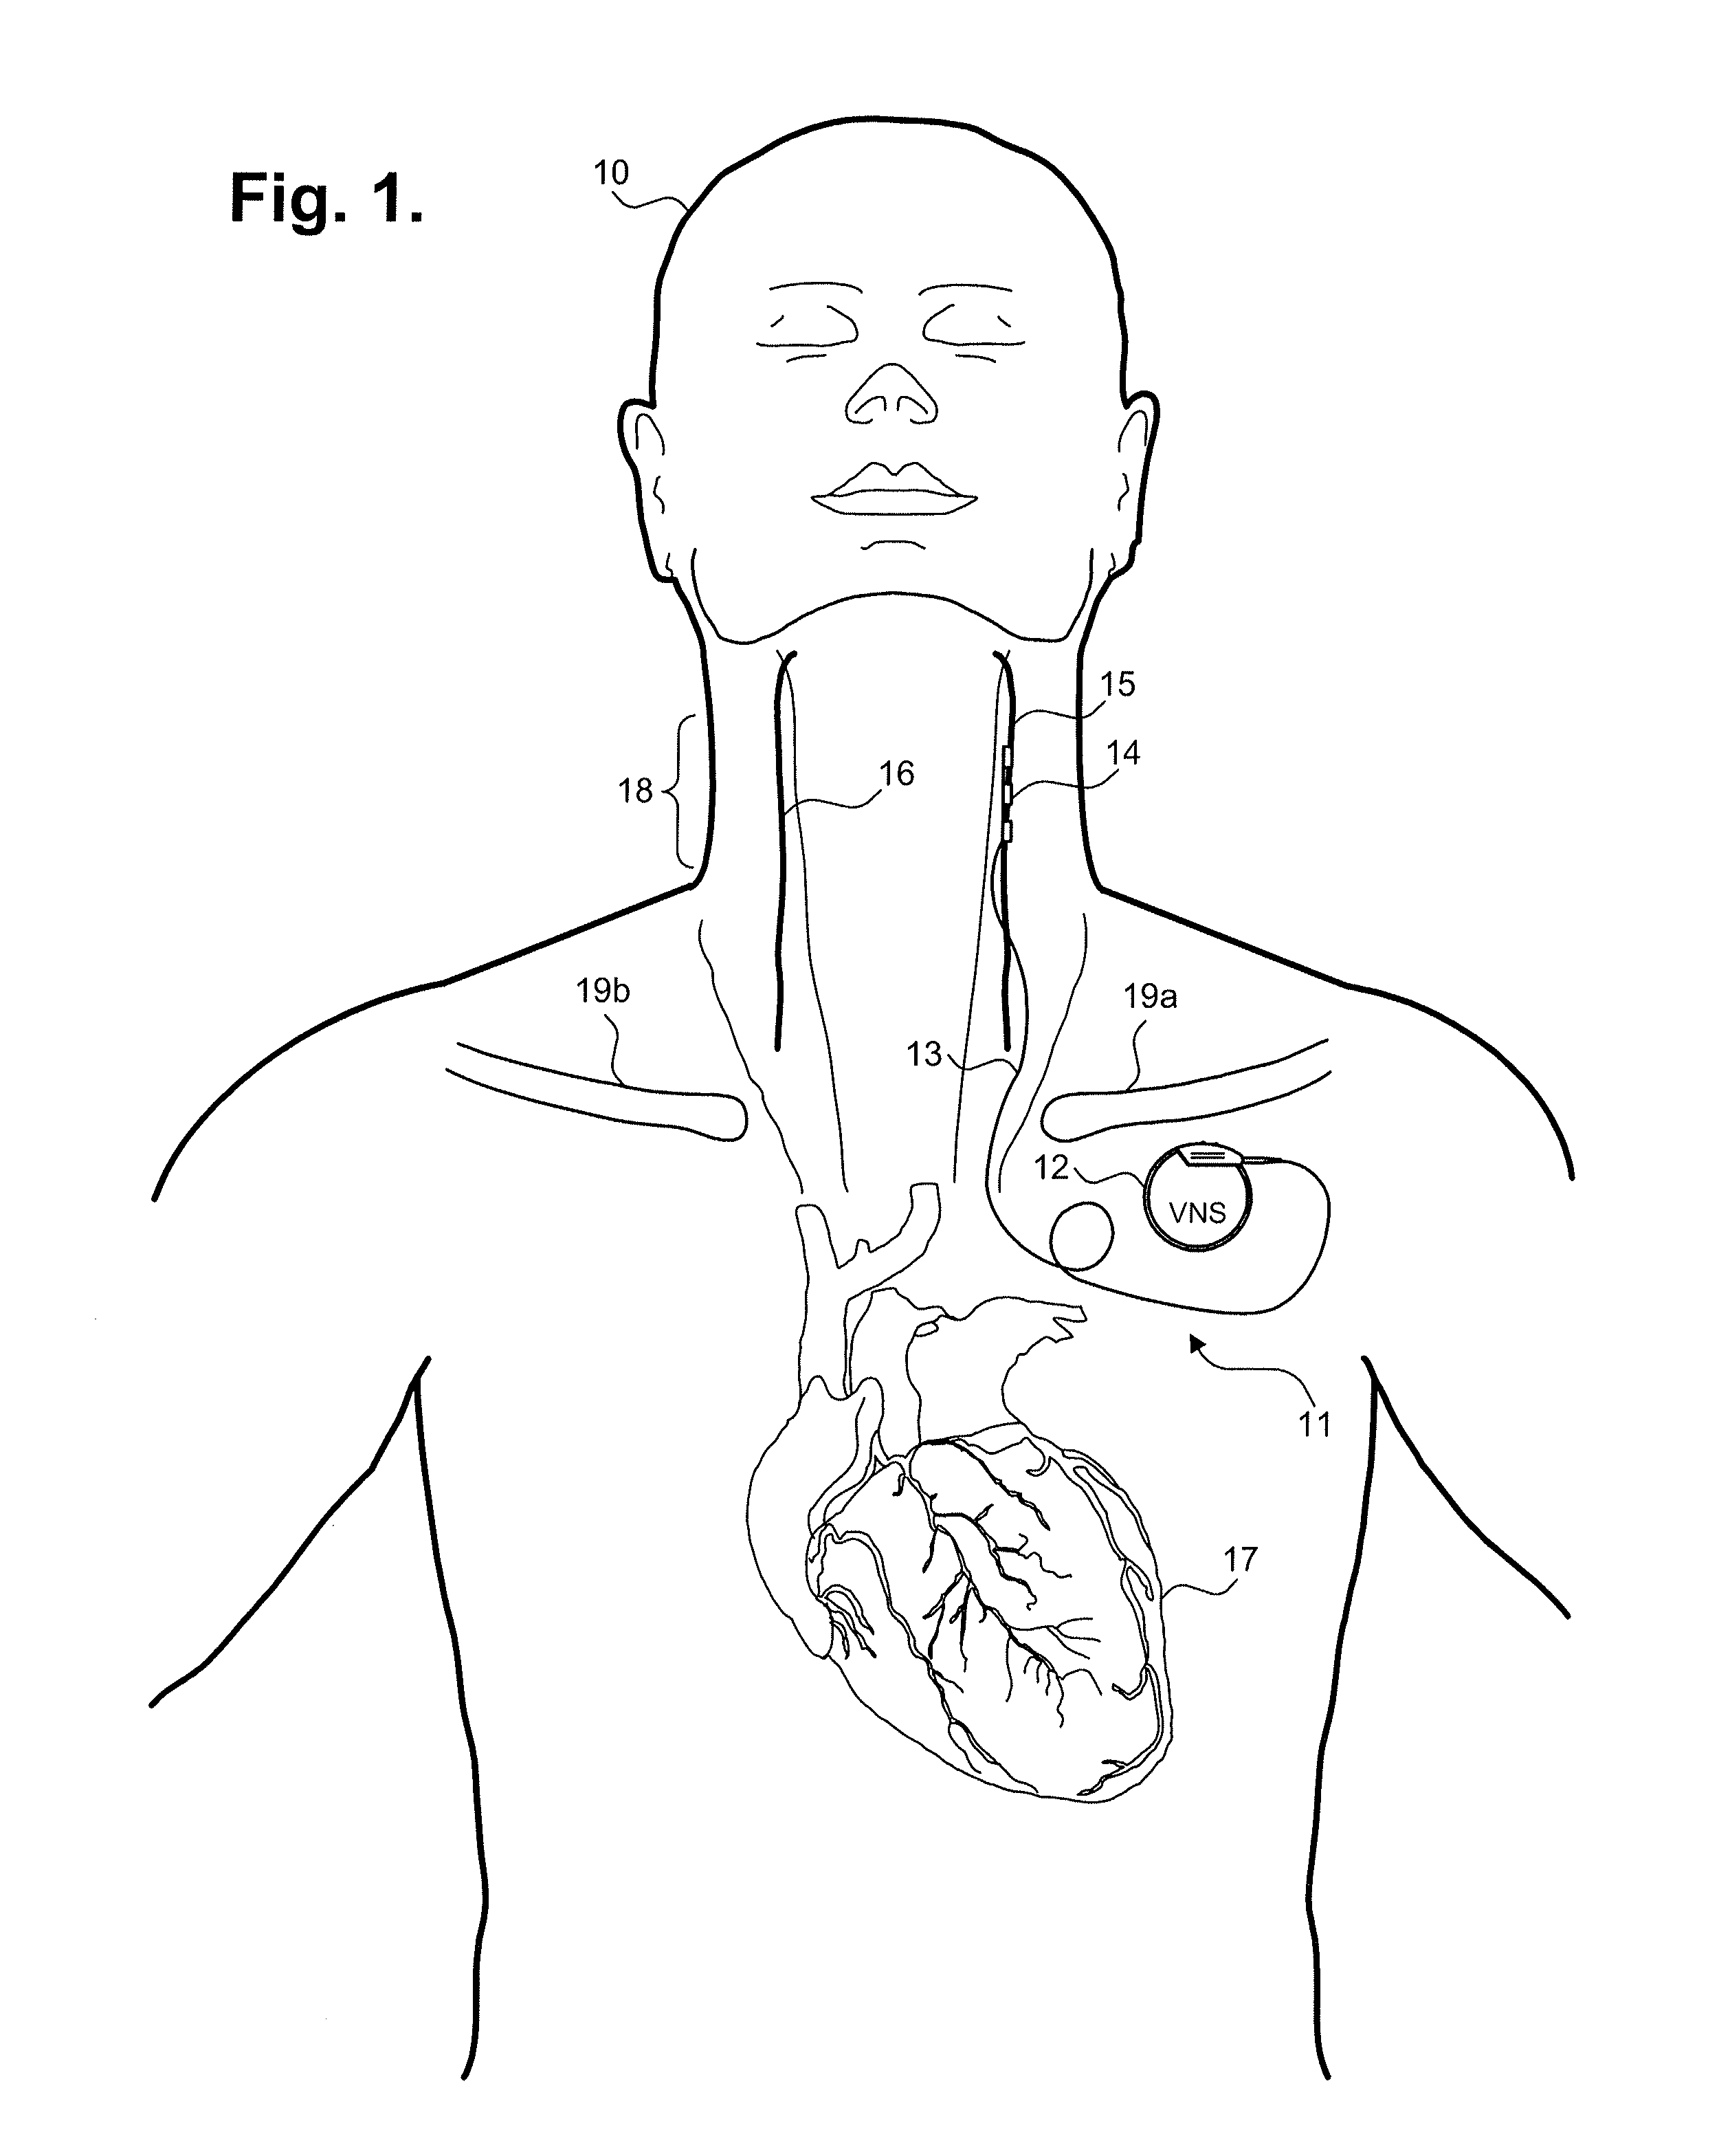 Implantable device for providing electrical stimulation of cervical vagus nerves for treatment of chronic cardiac dysfunction with leadless heart rate monitoring